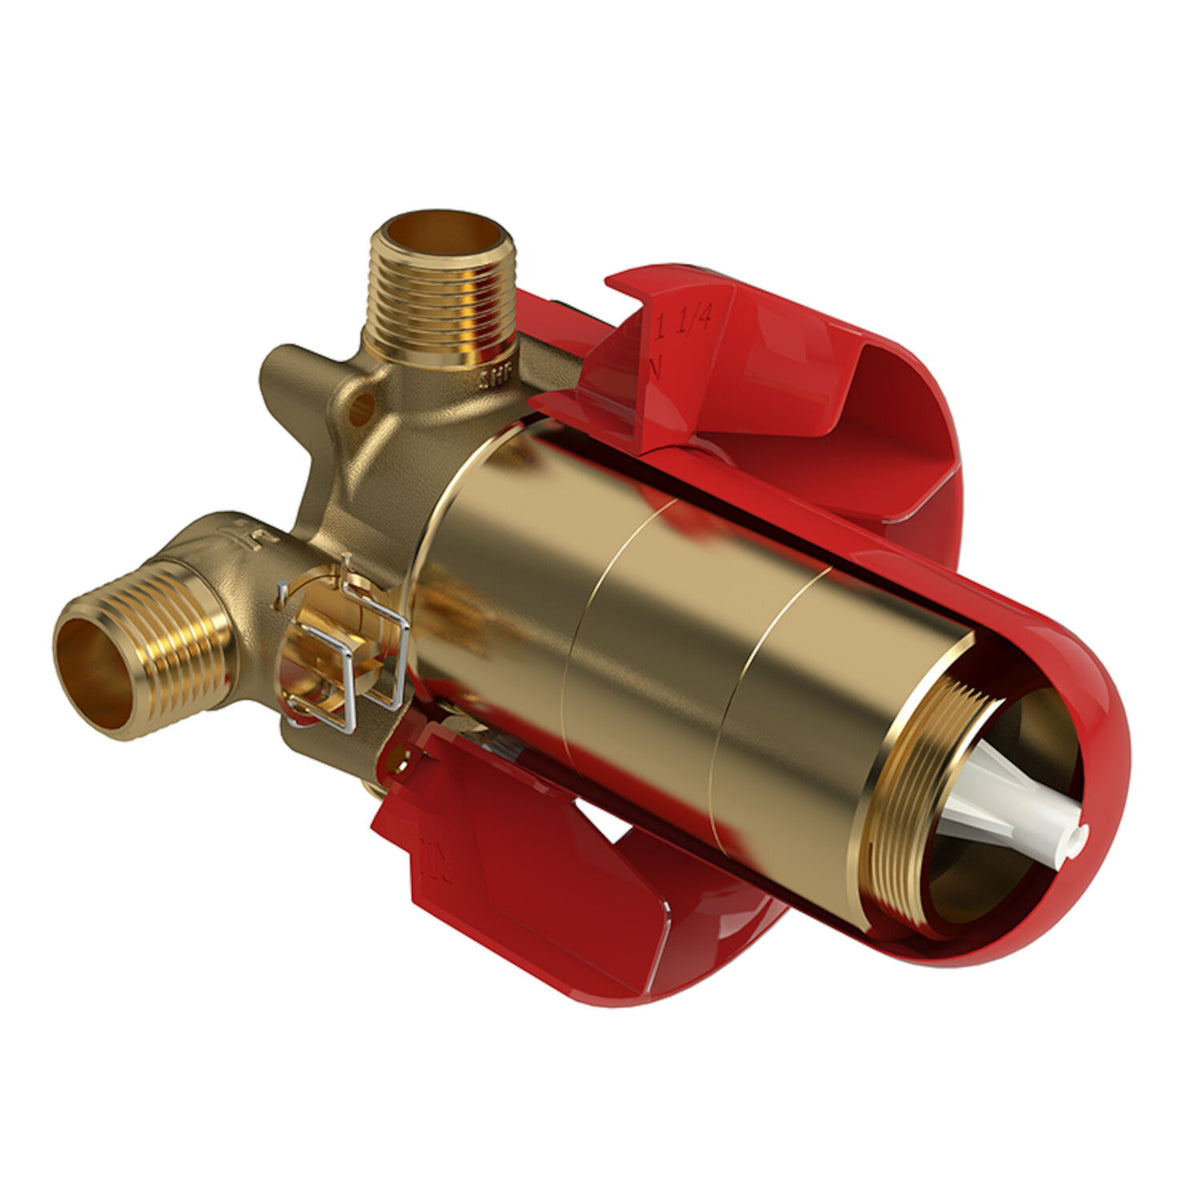 R23 1/2-INCH 2-WAY TYPE T/P (THERMOSTATIC/PRESSURE BALANCE) COAXIAL VALVE ROUGH